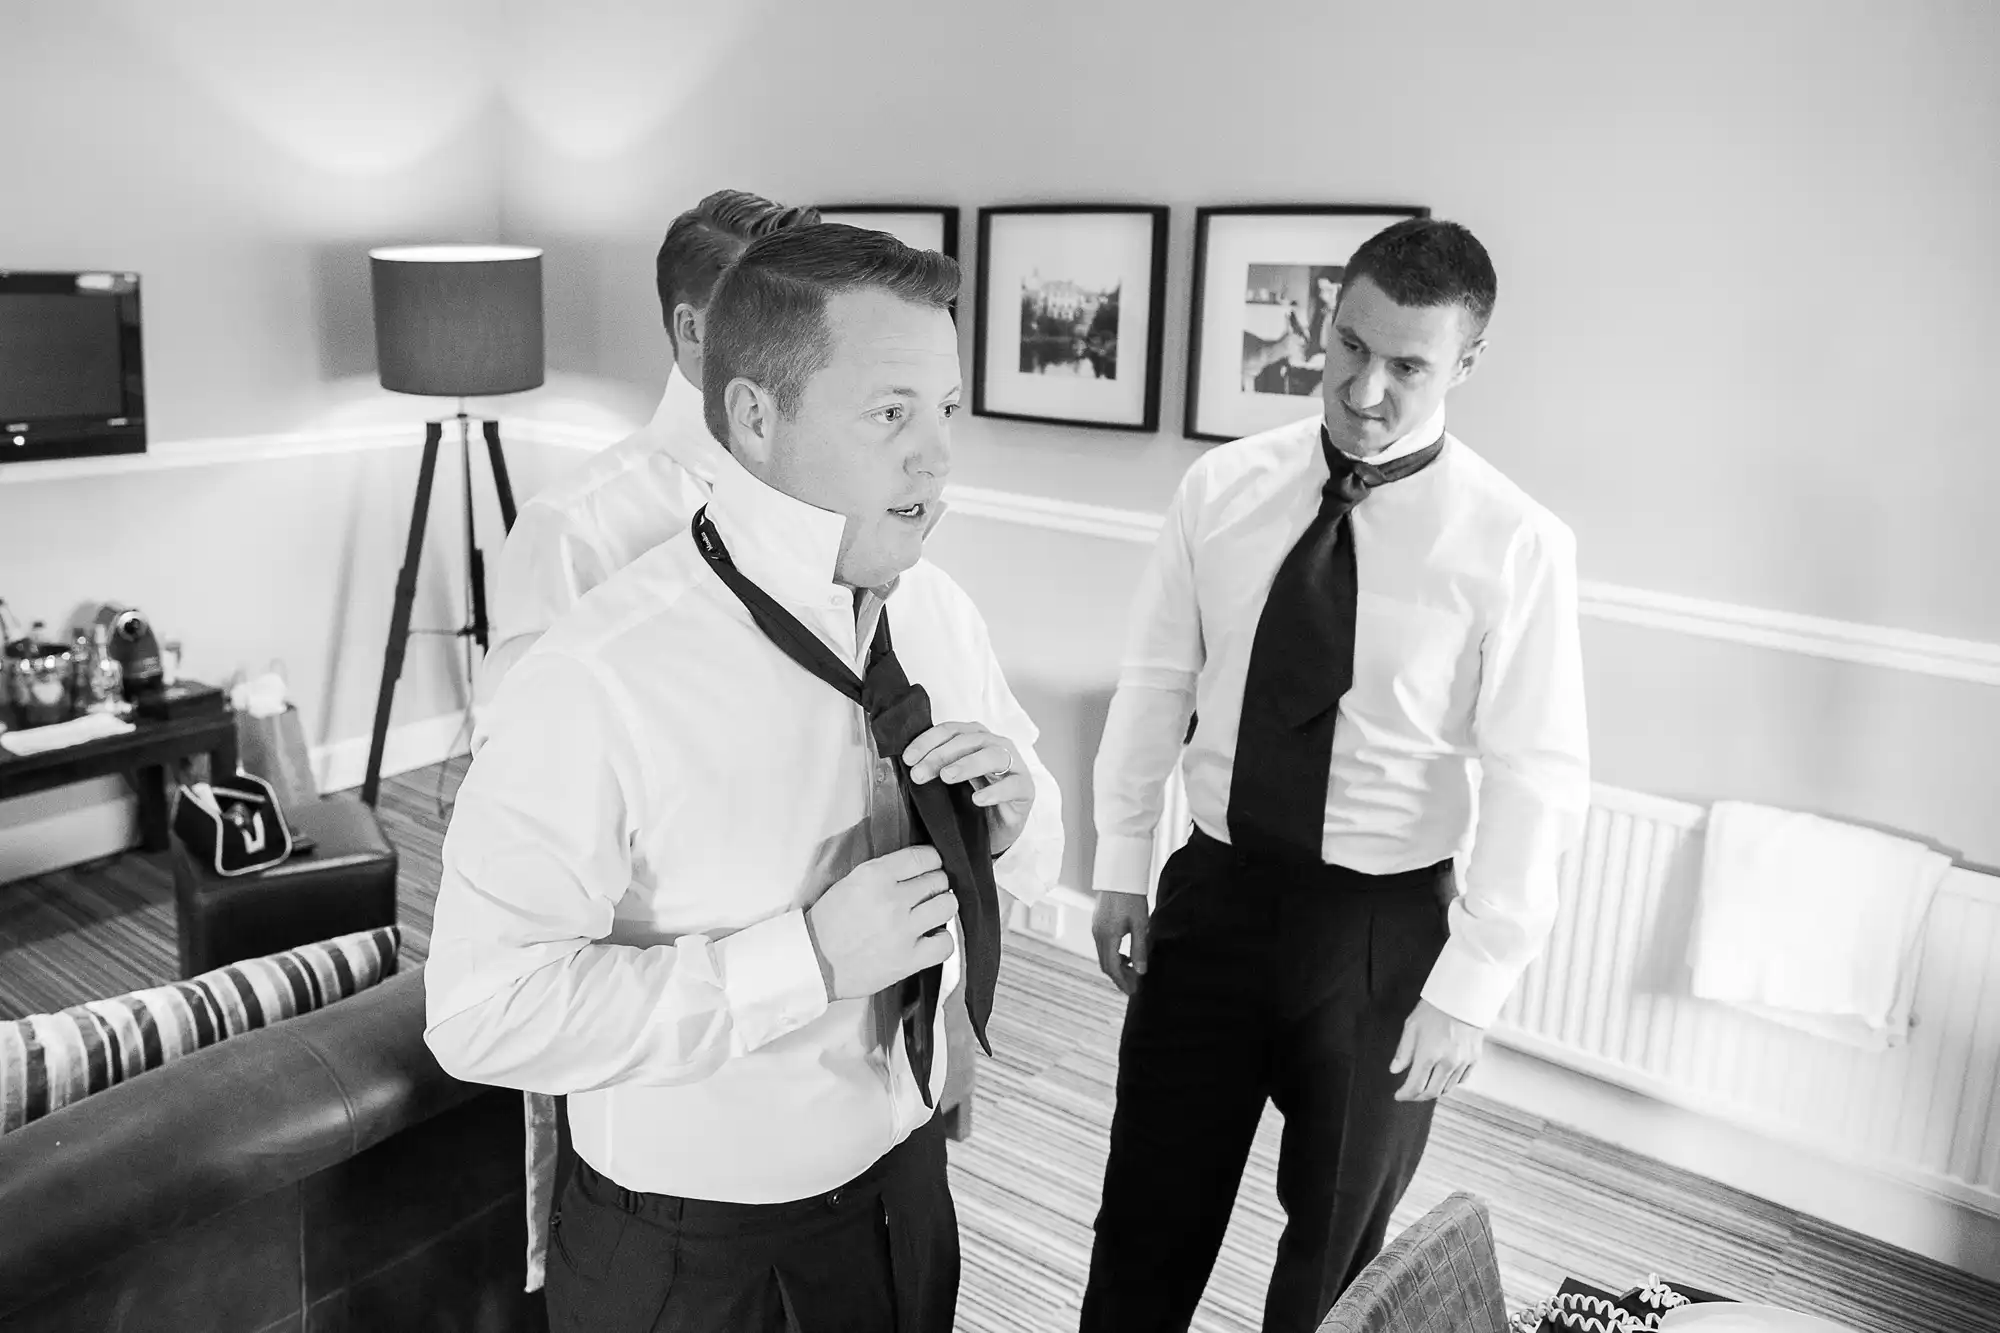 Two men in a well-lit room dressing up in formal attire with one adjusting his tie while the other watches. room decor includes photographs on the wall and a standing lamp.